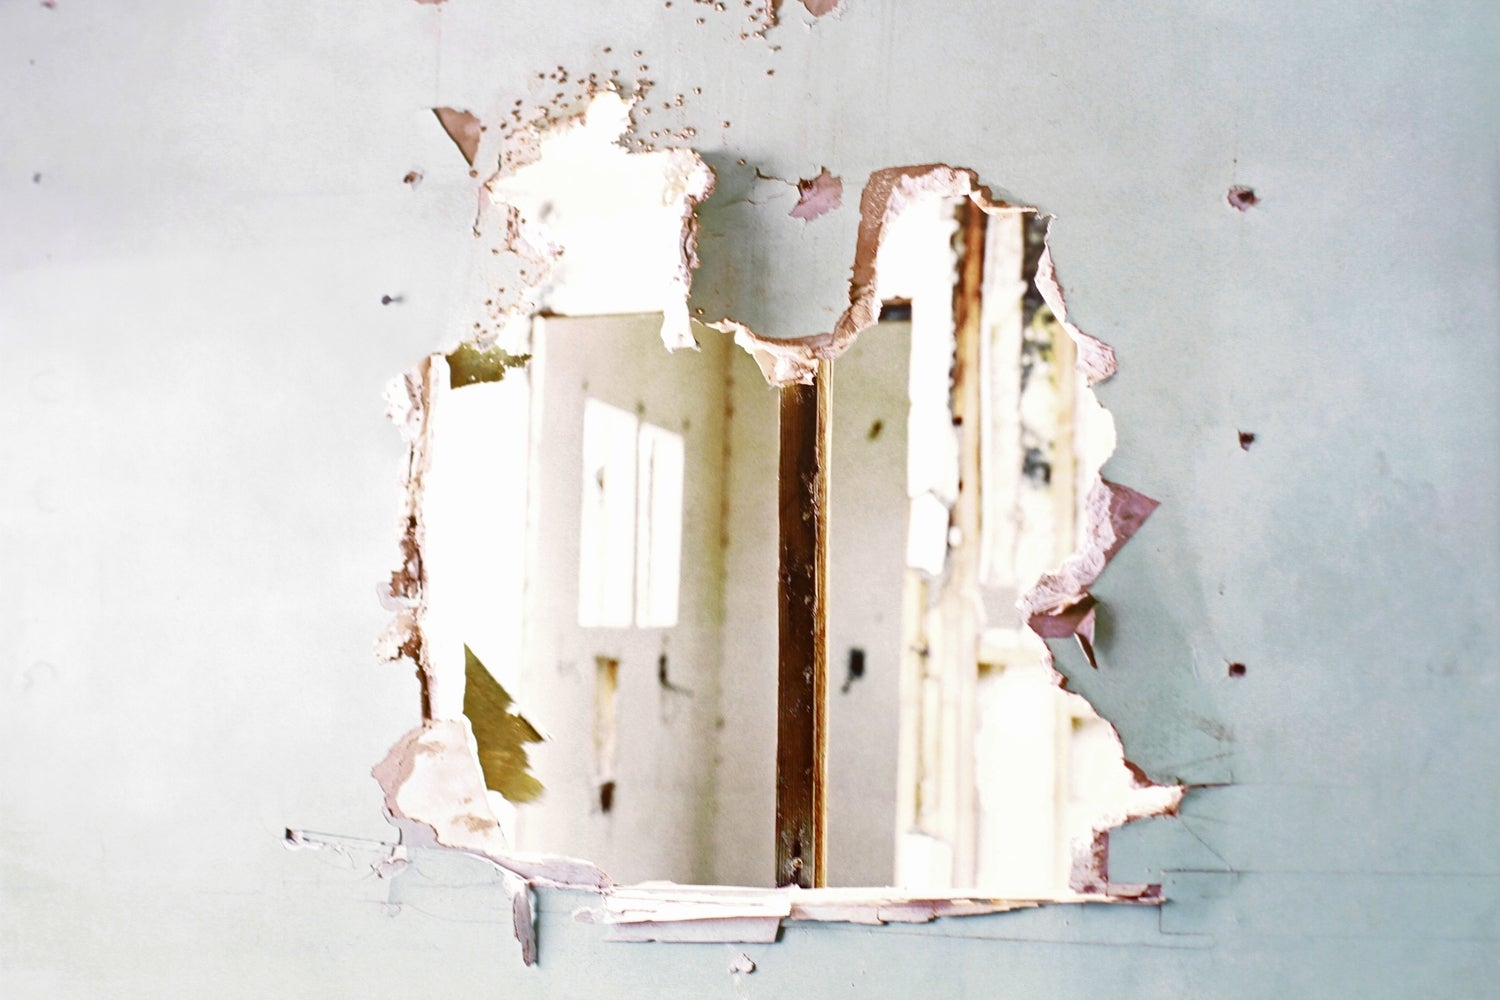 How to patch holes in drywall | Popular Science